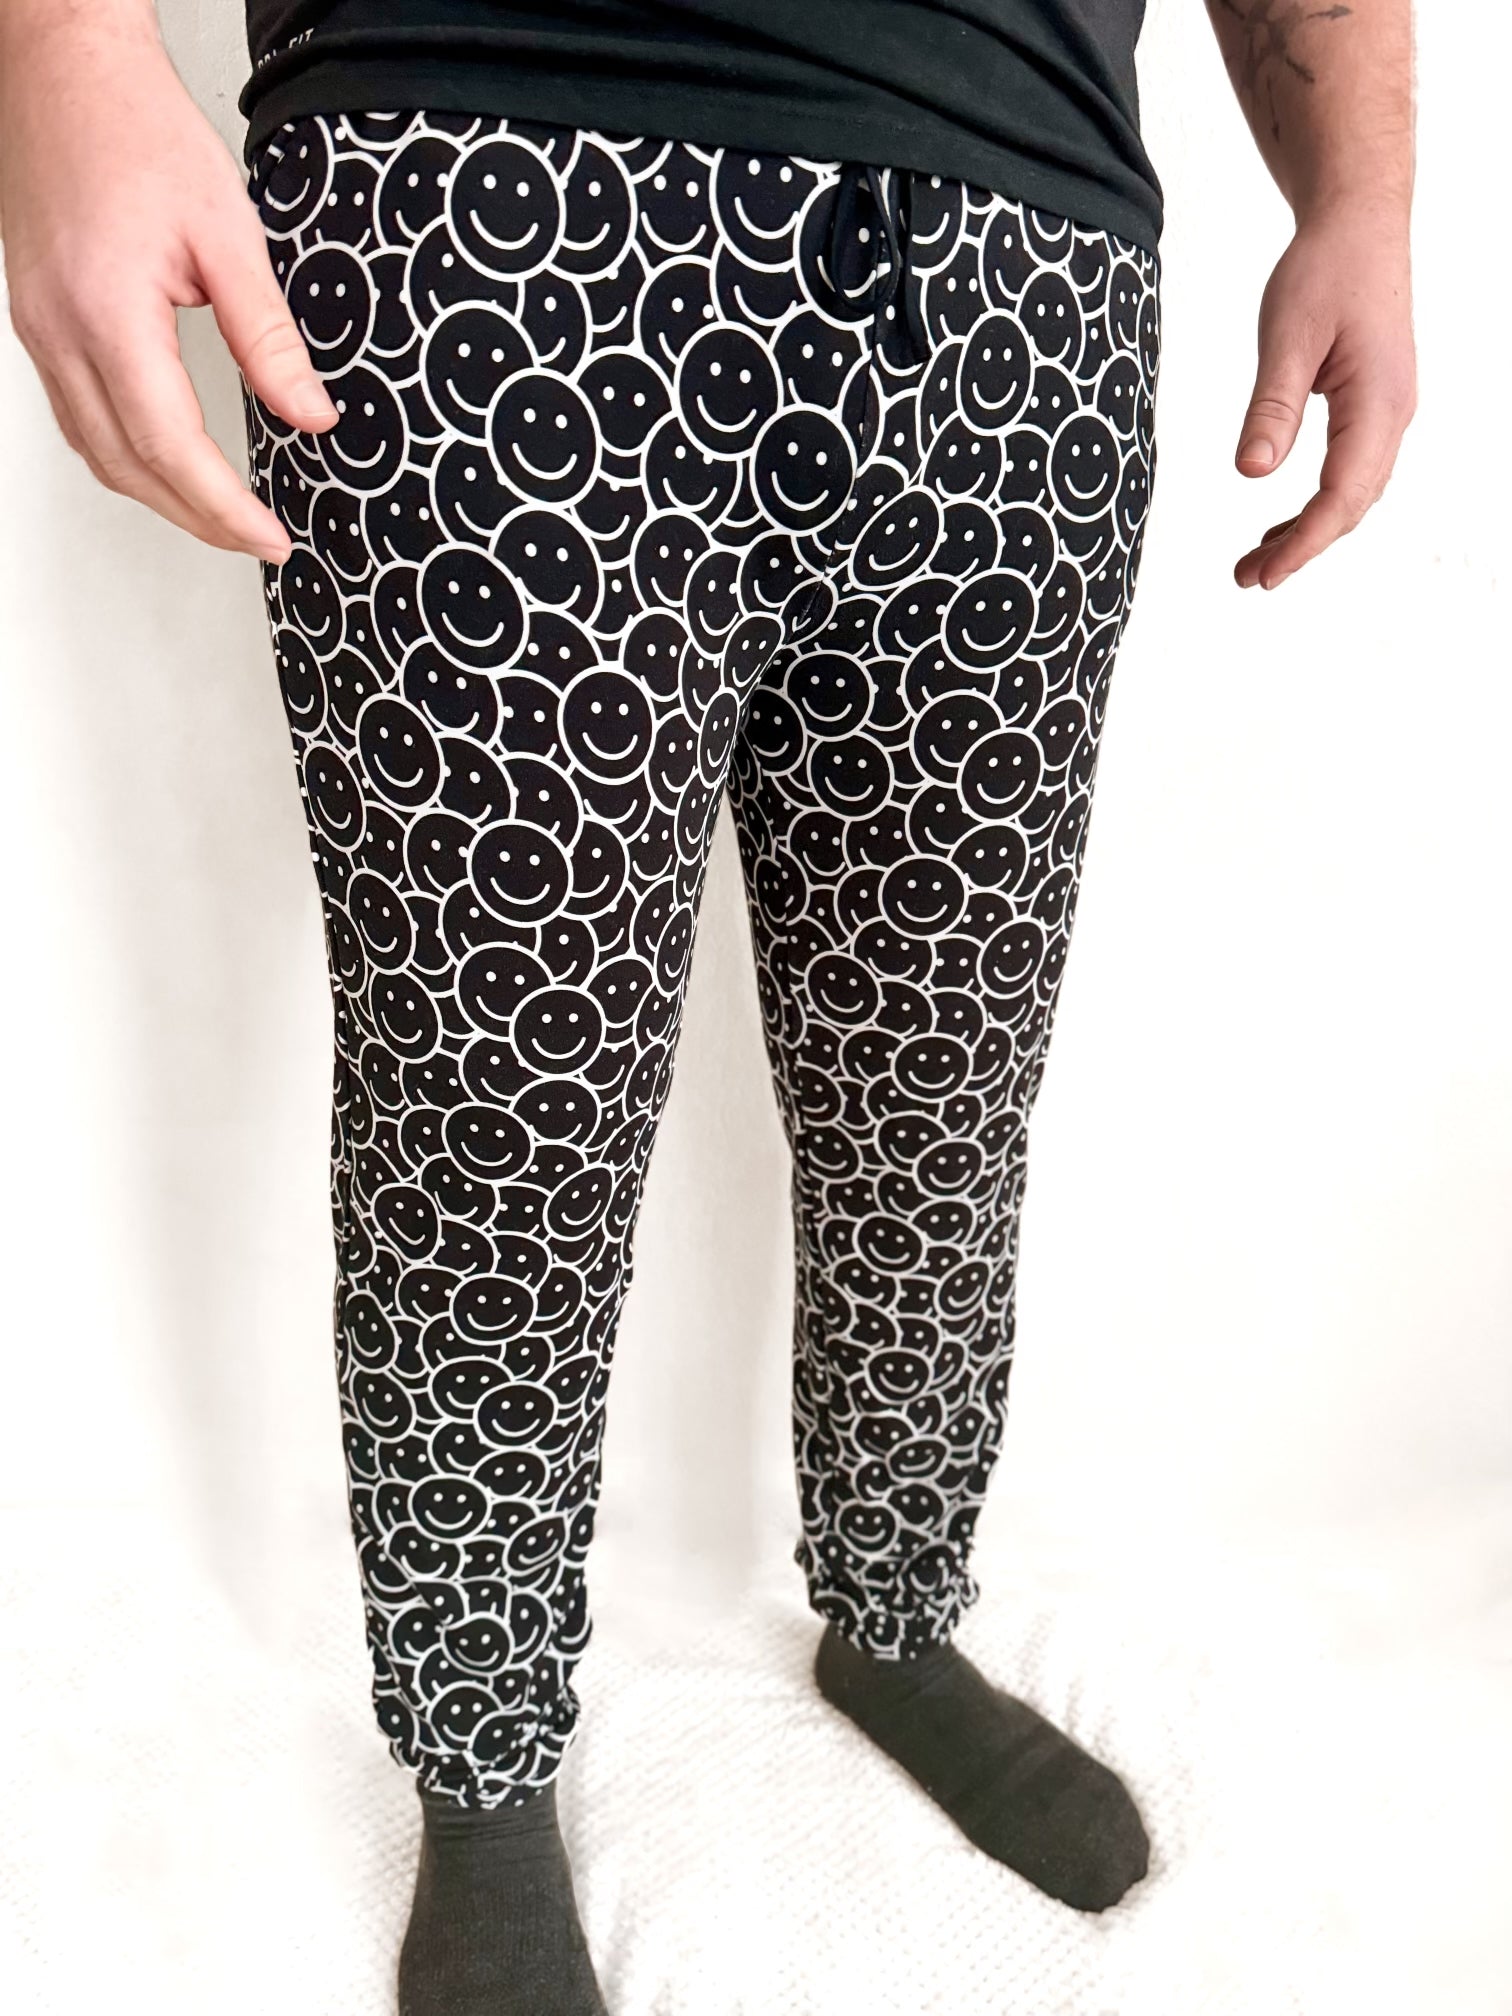 Bamboo Made You Smile men’s joggers